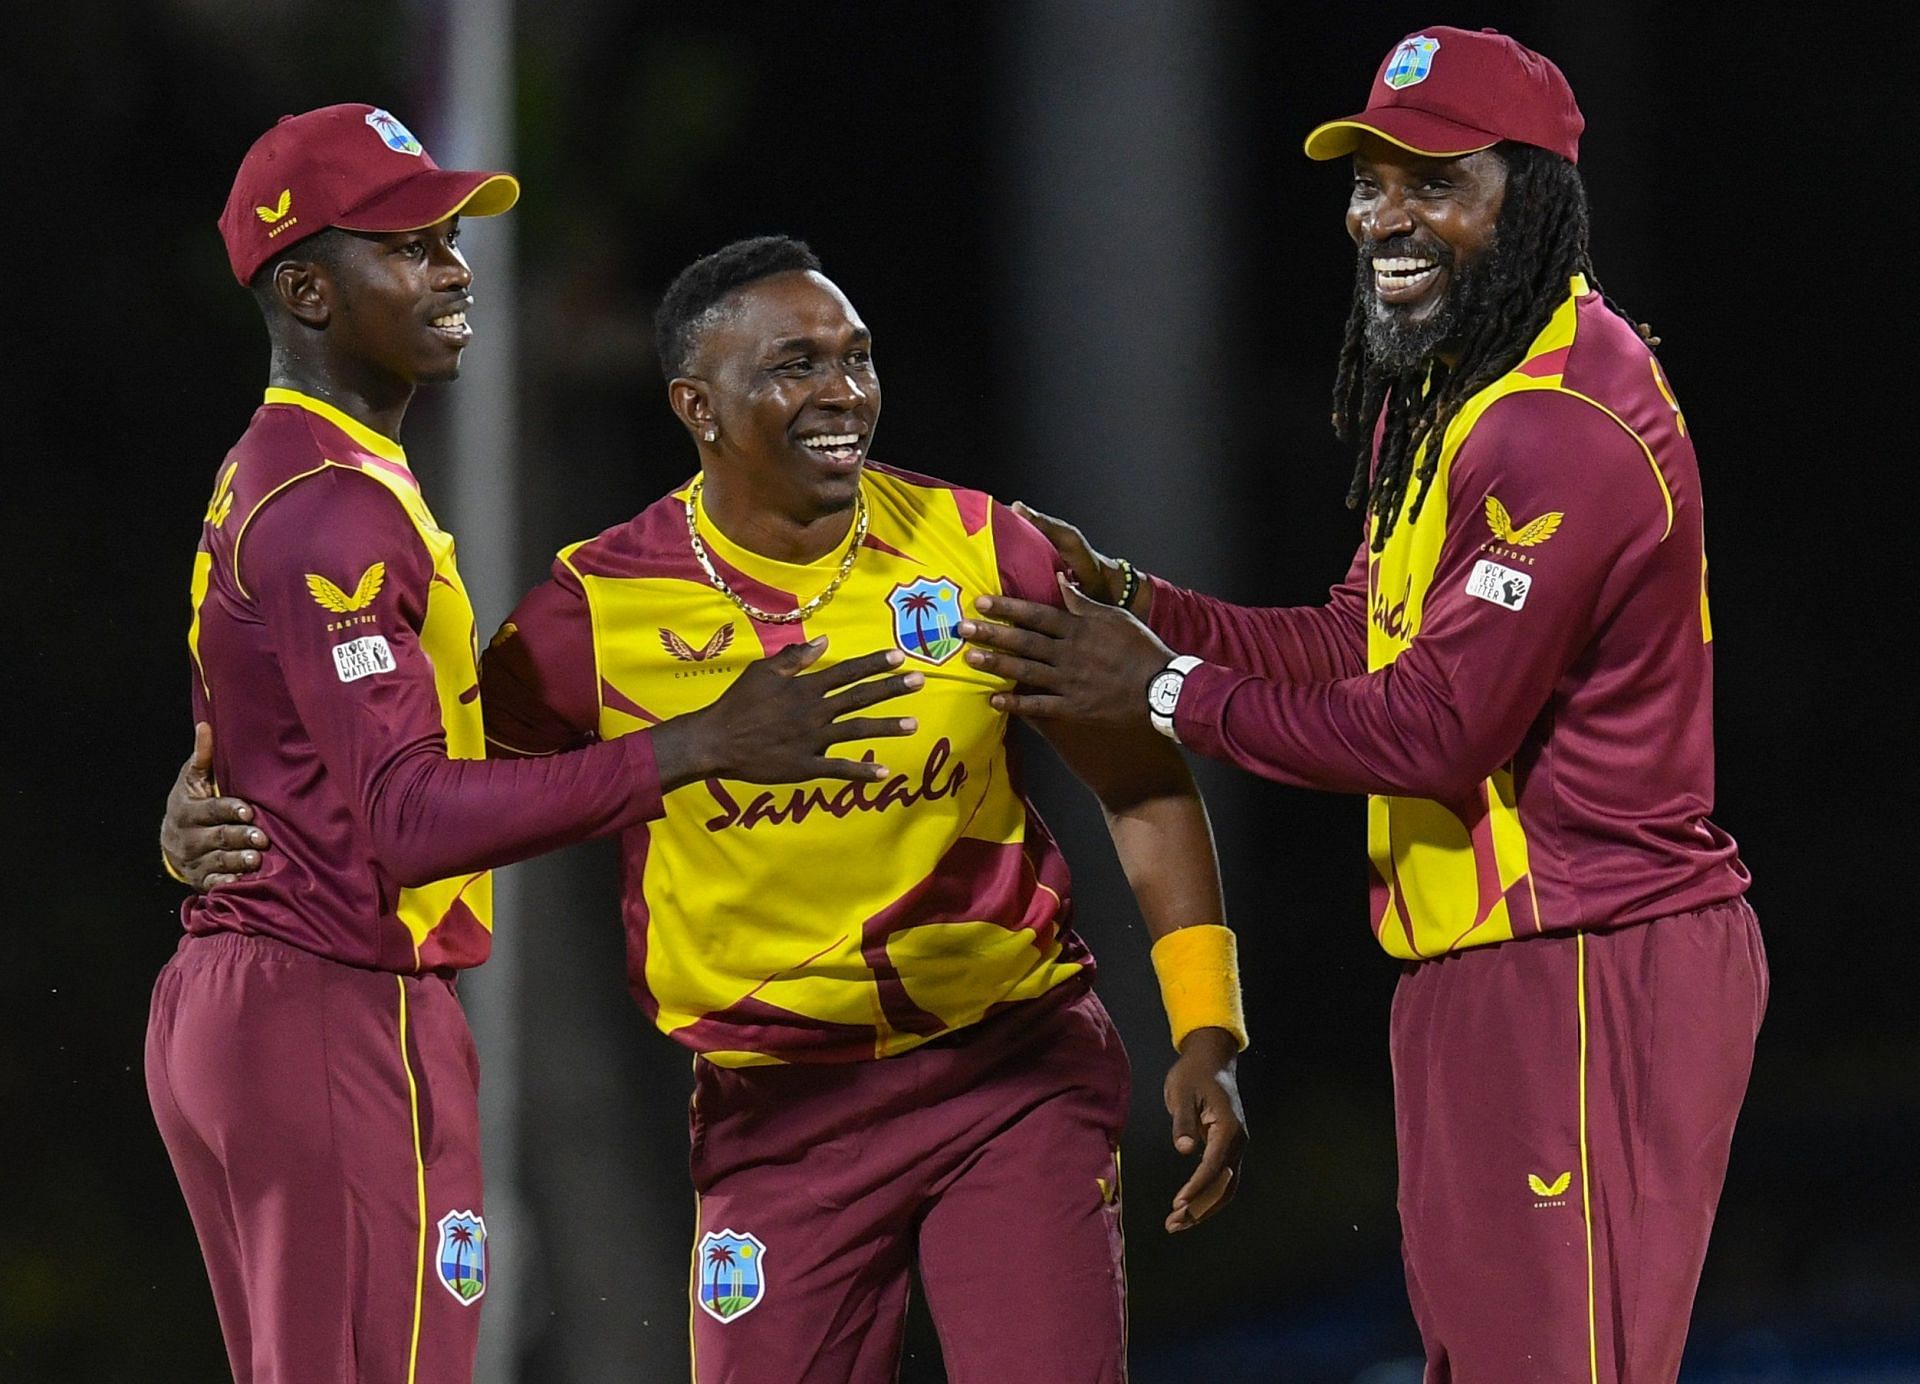 West Indies will play their second warm-up match against Afghanistan